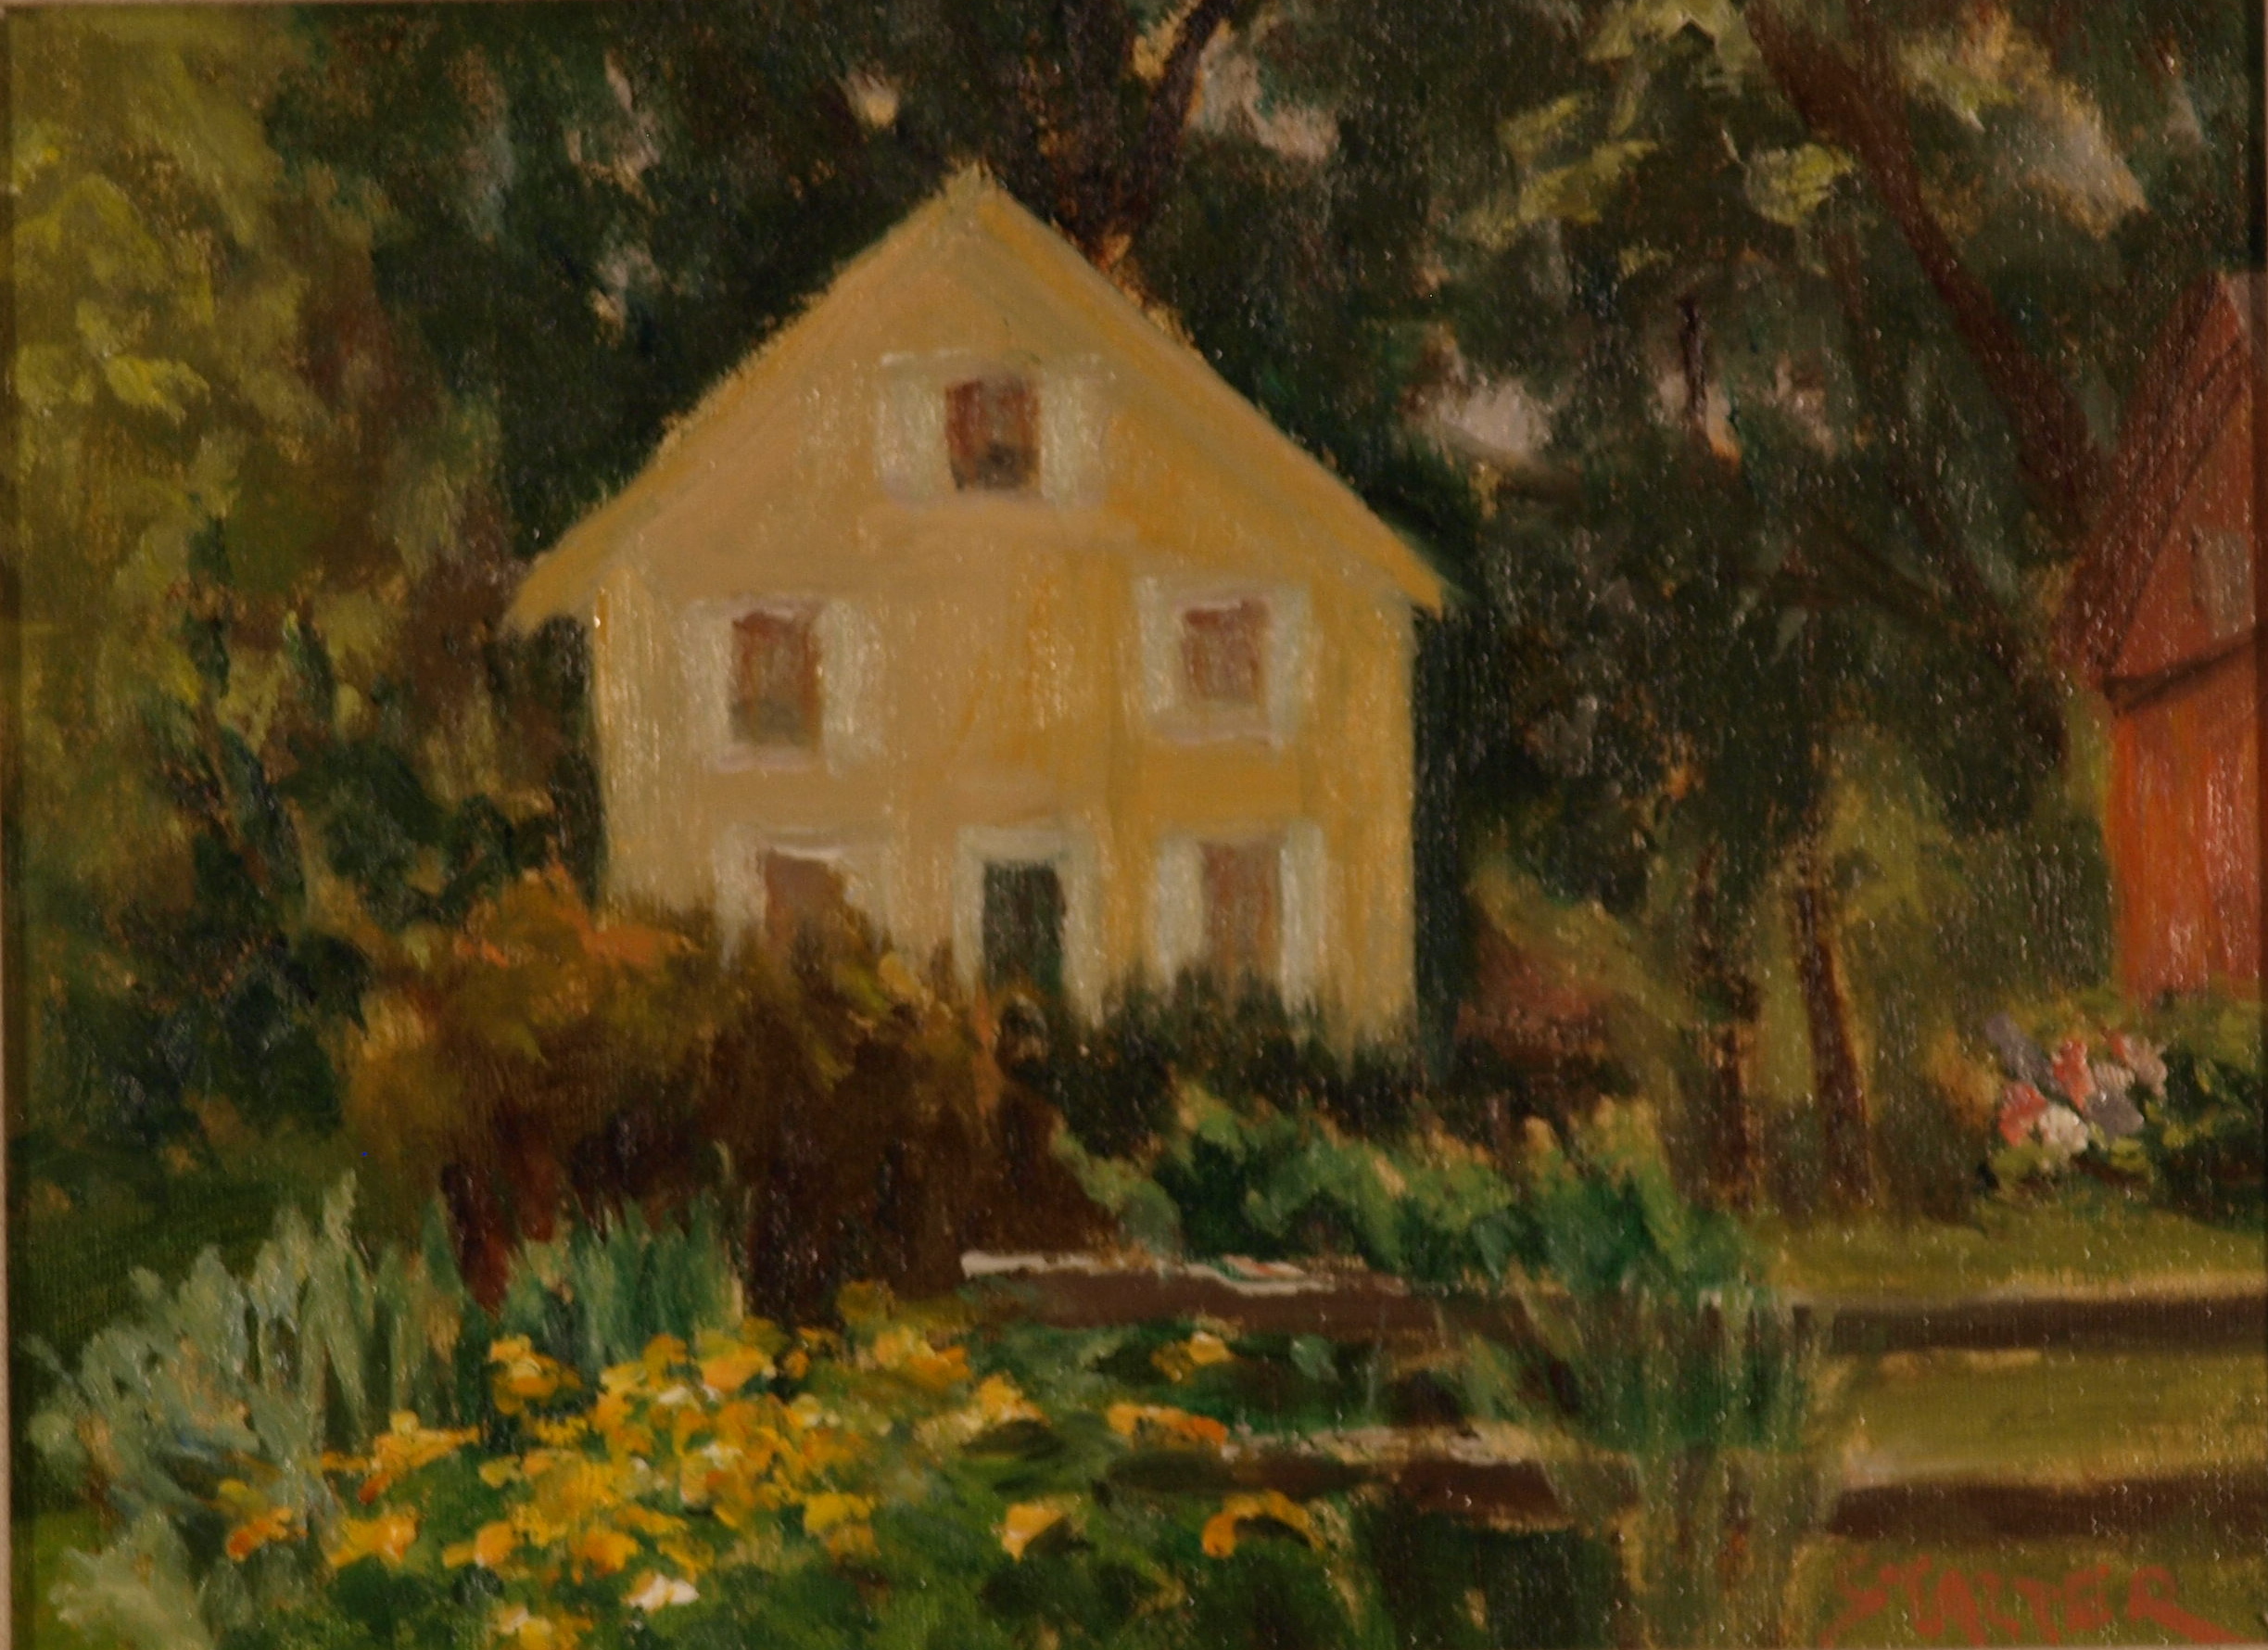 Sue's Garden, Oil on Canvas on Panel, 9 x 12 Inches, by Richard Stalter, $225